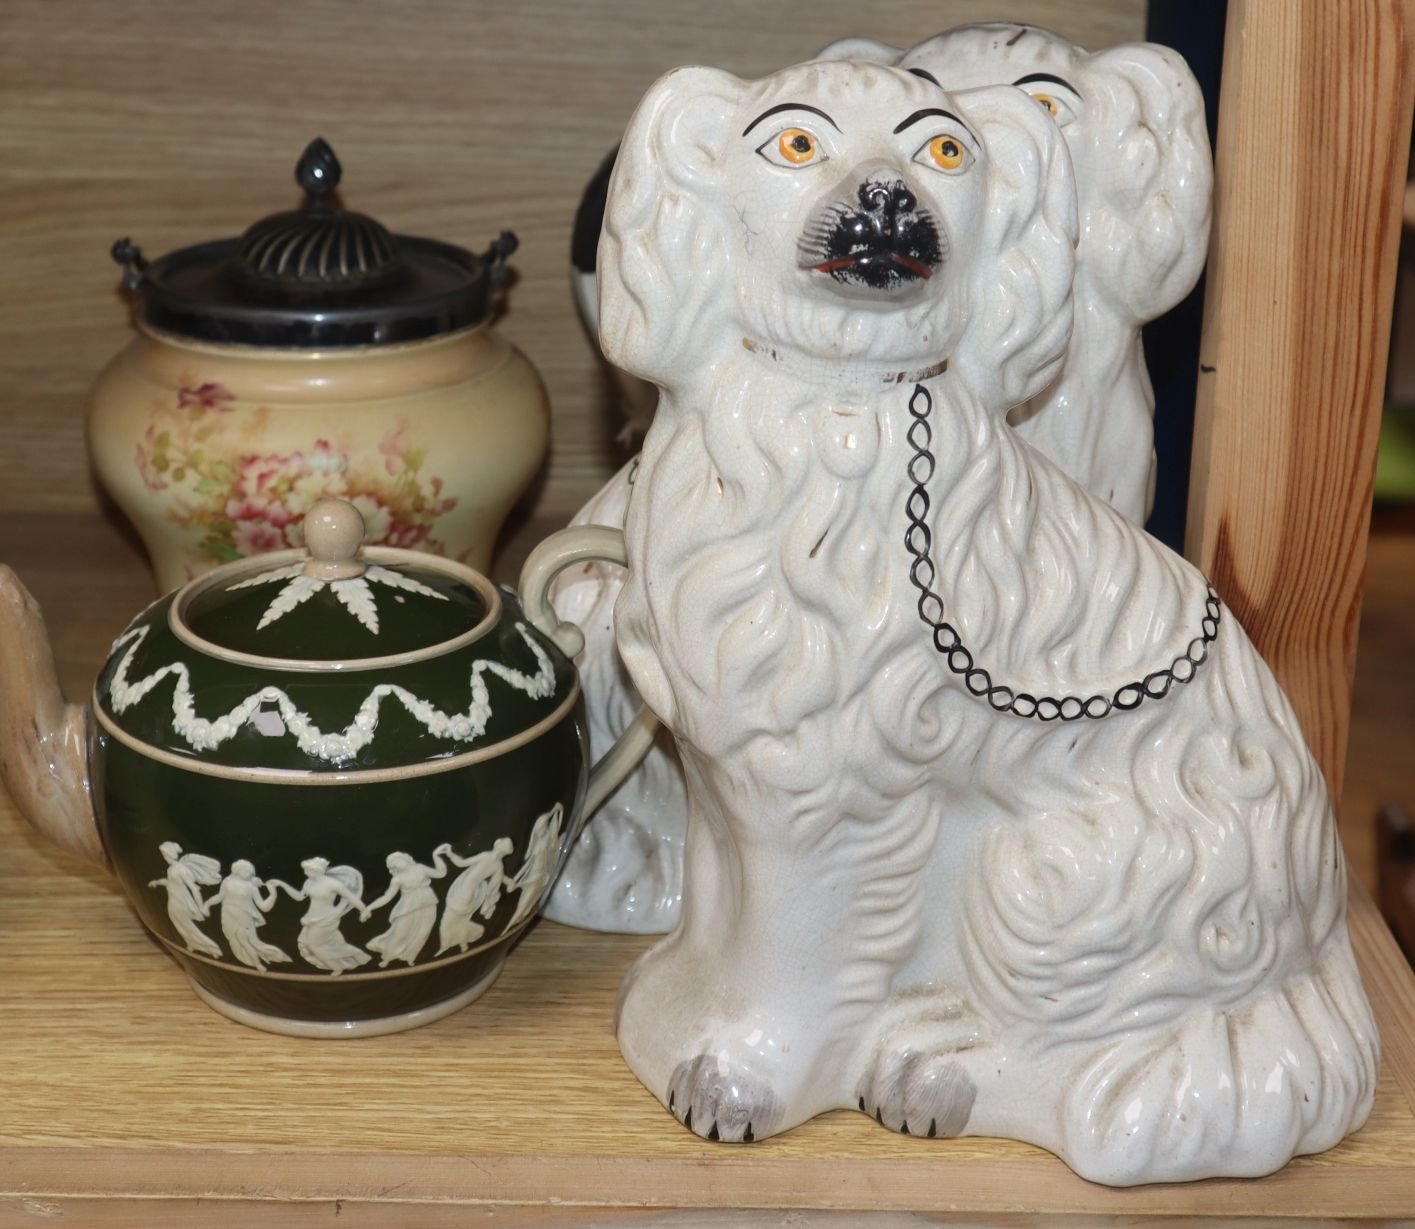 A pair of Staffordshire dogs, a Spode teapot and two other pieces